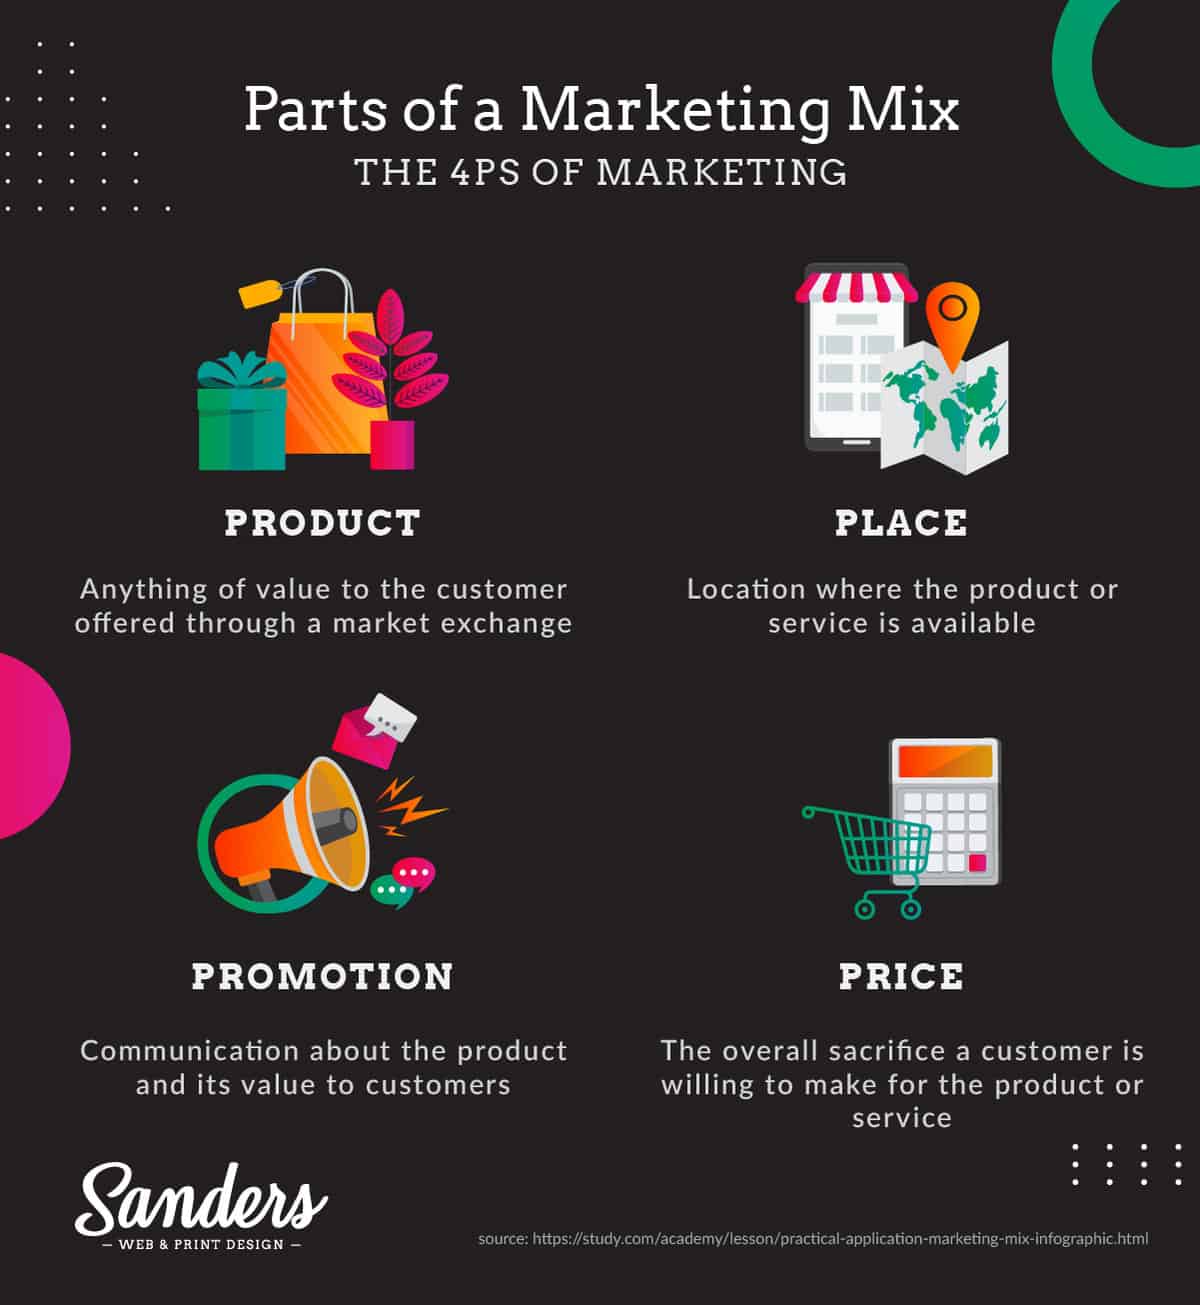 What Is The Importance Of Ad In A Marketing Mix - Sanders Design